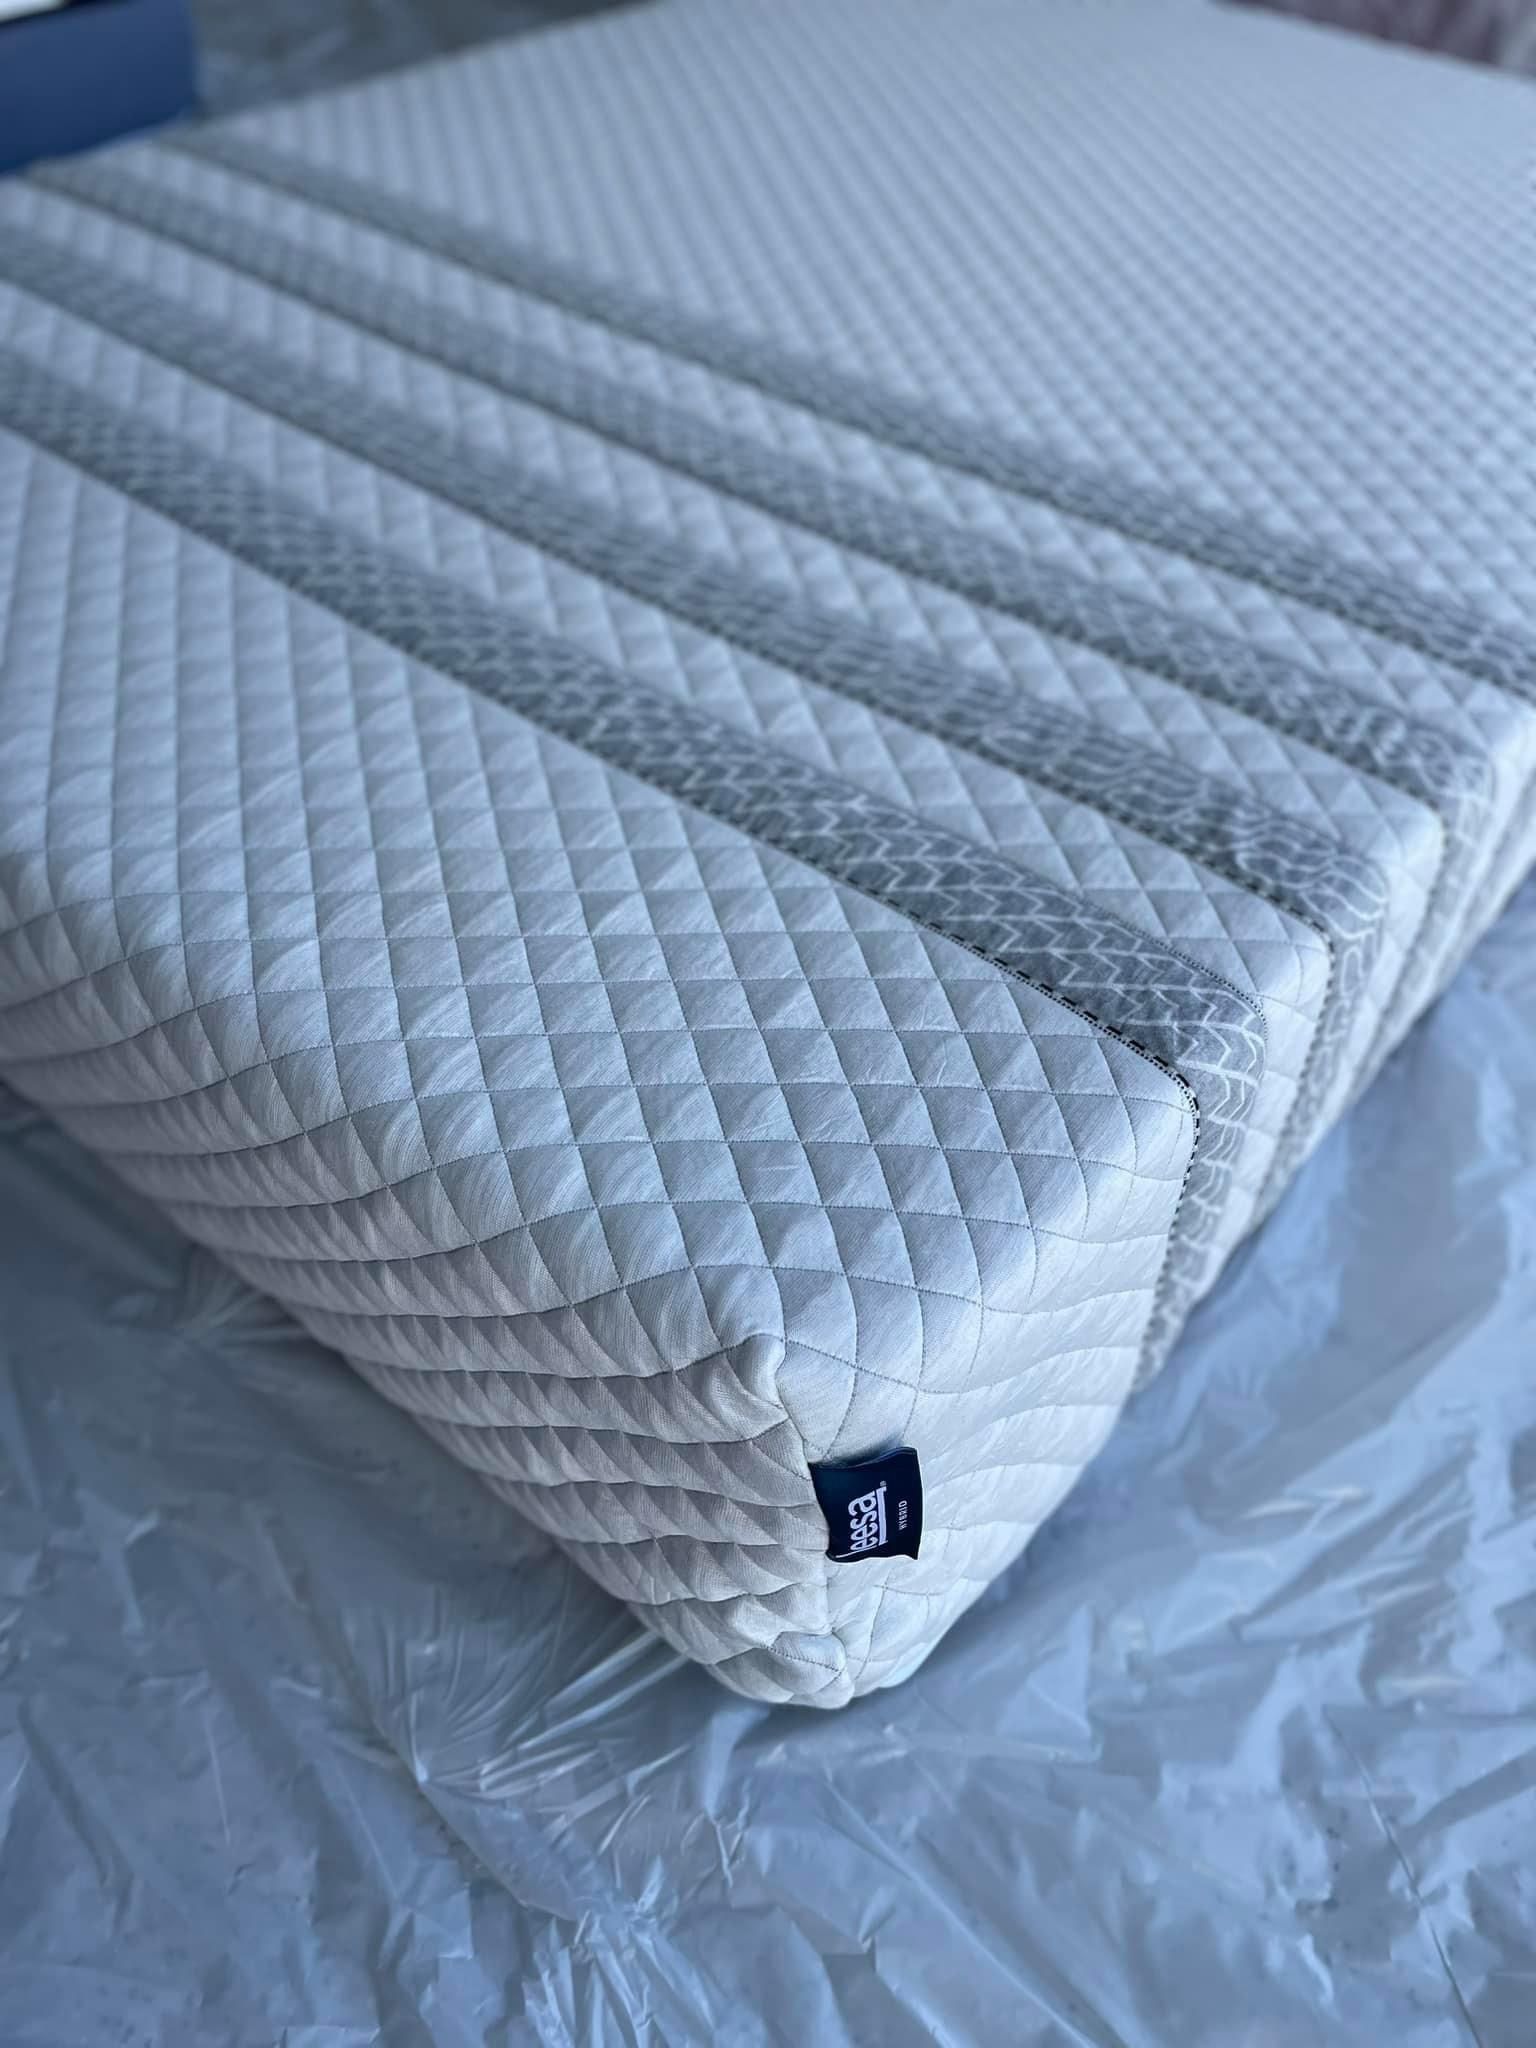 Almost new King Leesa Sapira Hybrid Mattress 70 % off Retail FREE Local Delivery!